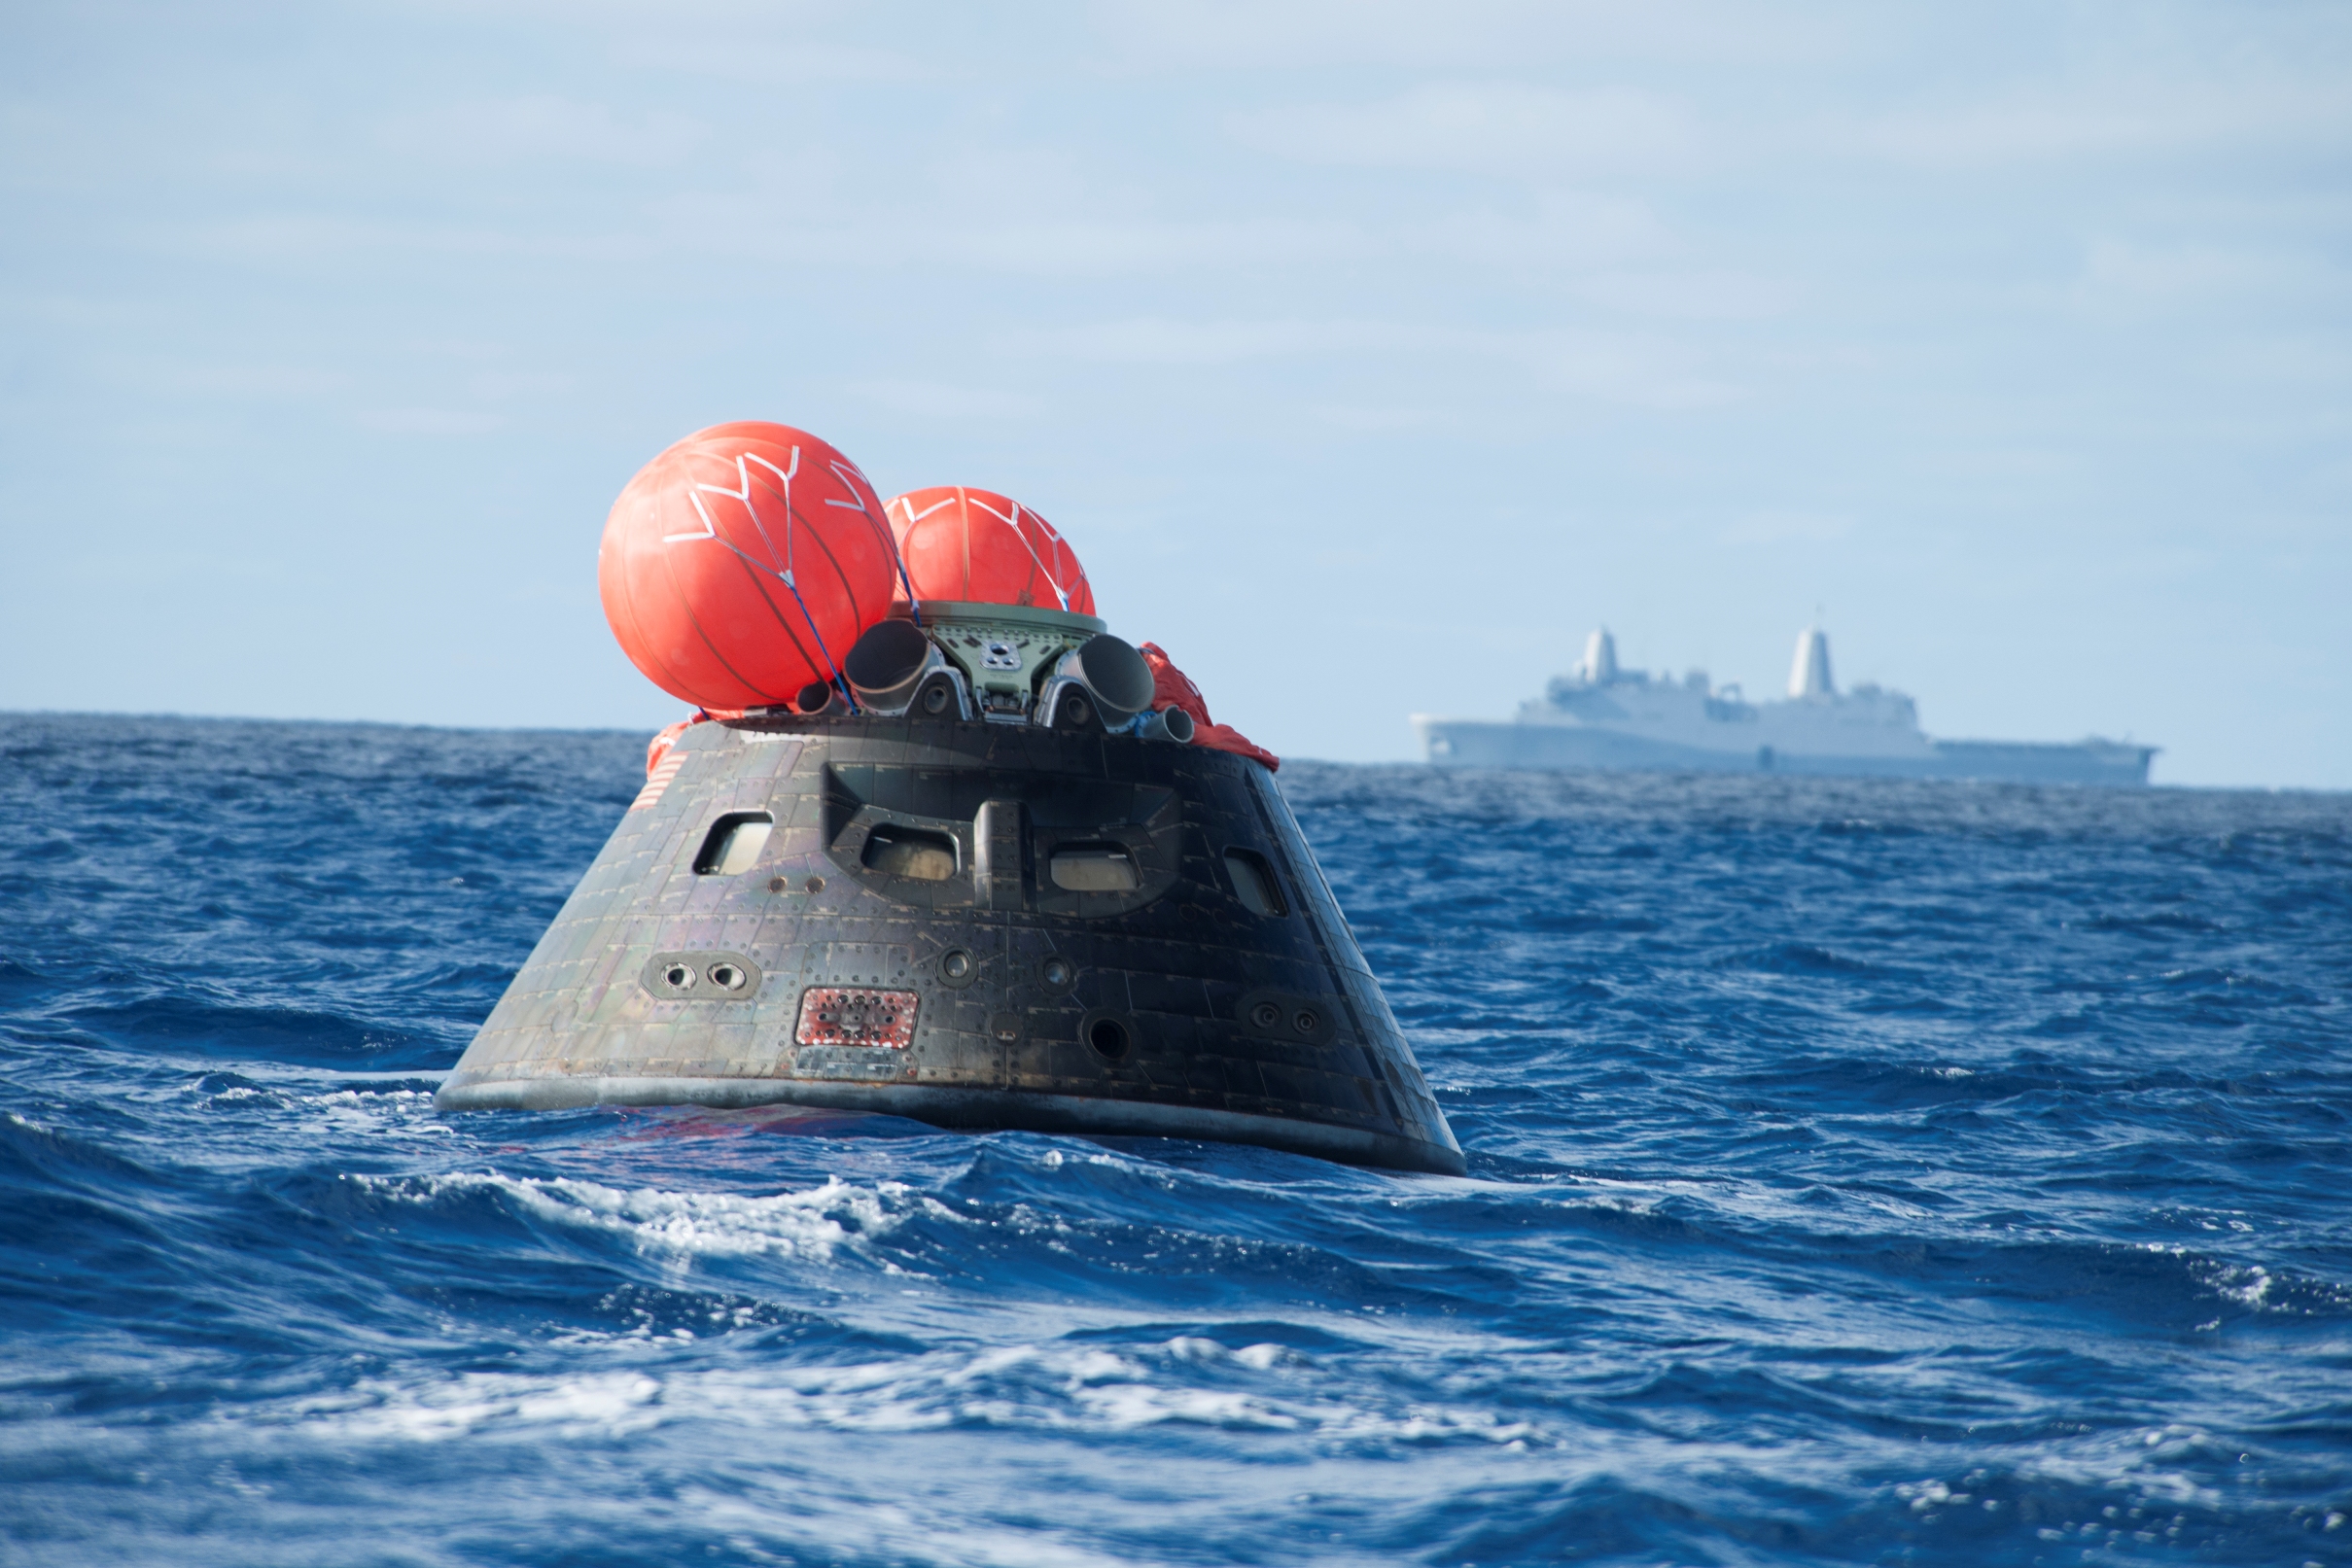 The Orion Spacecraft Floats In Pacific Ocean After An Uncrewed